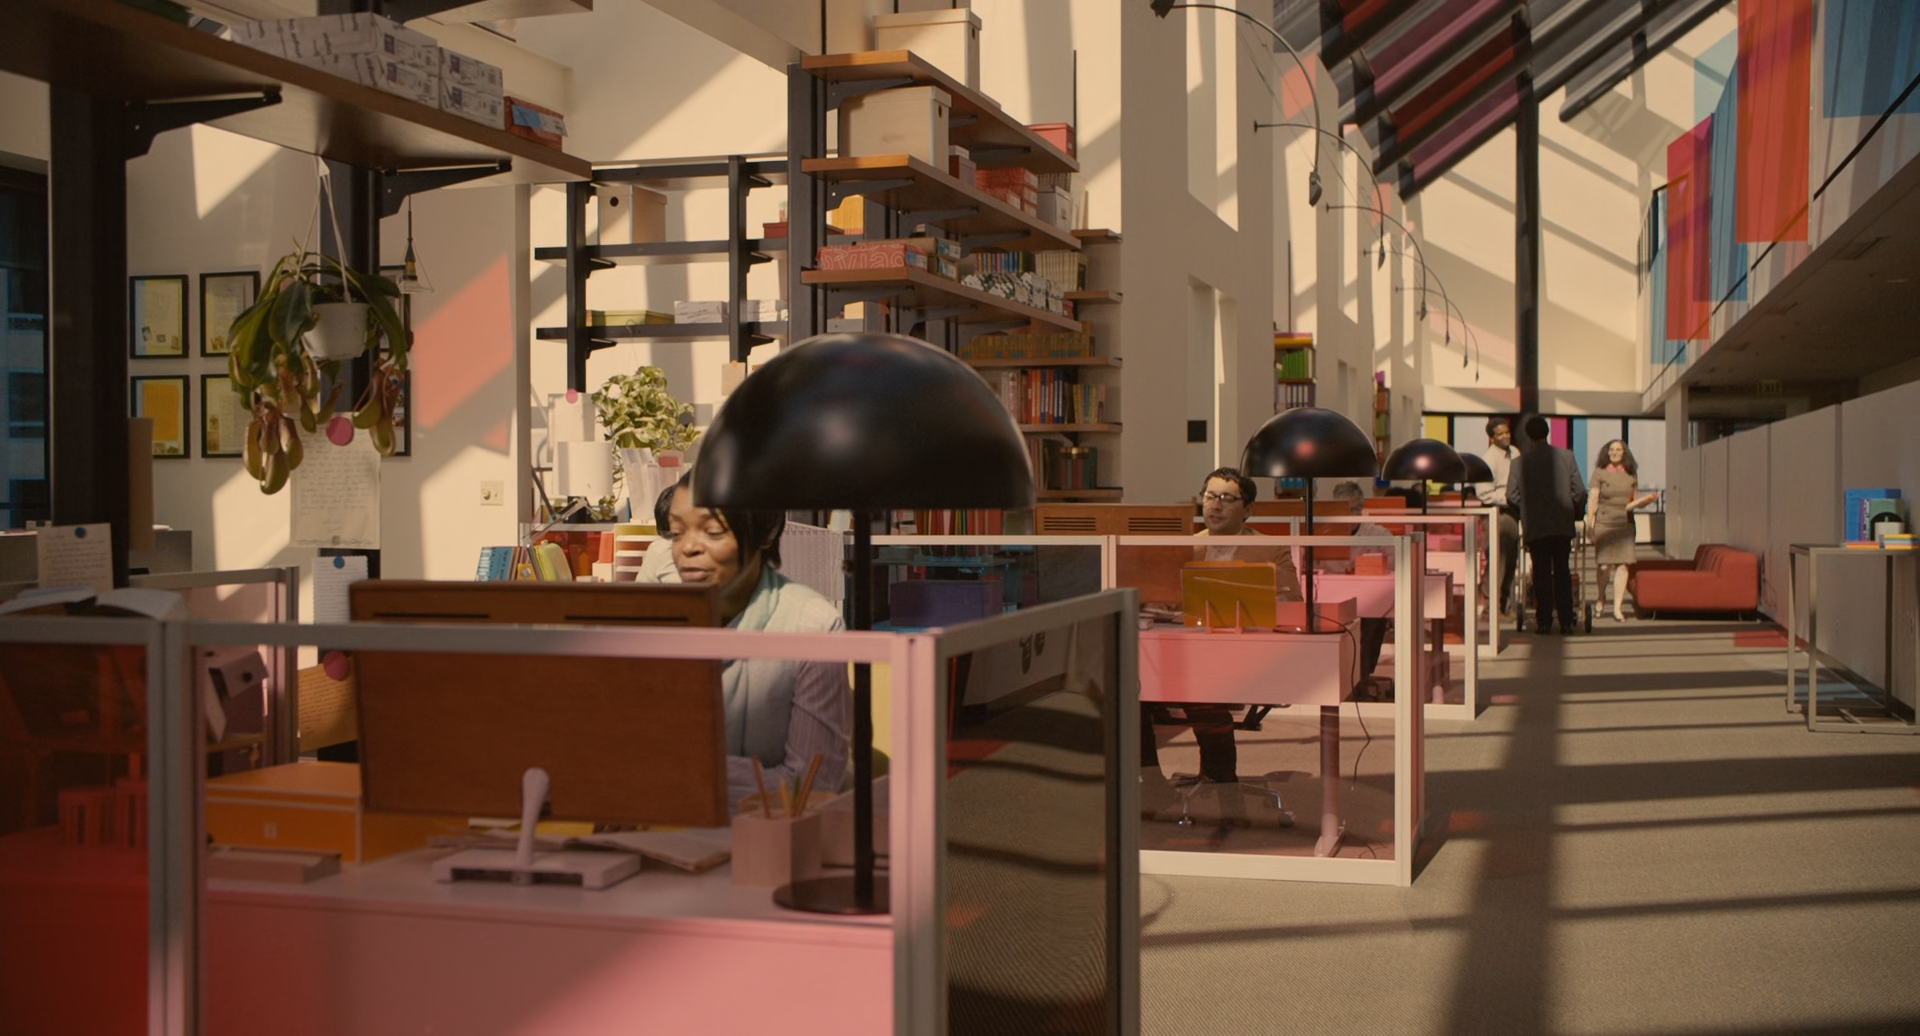 Her screenshot, the candy colored office